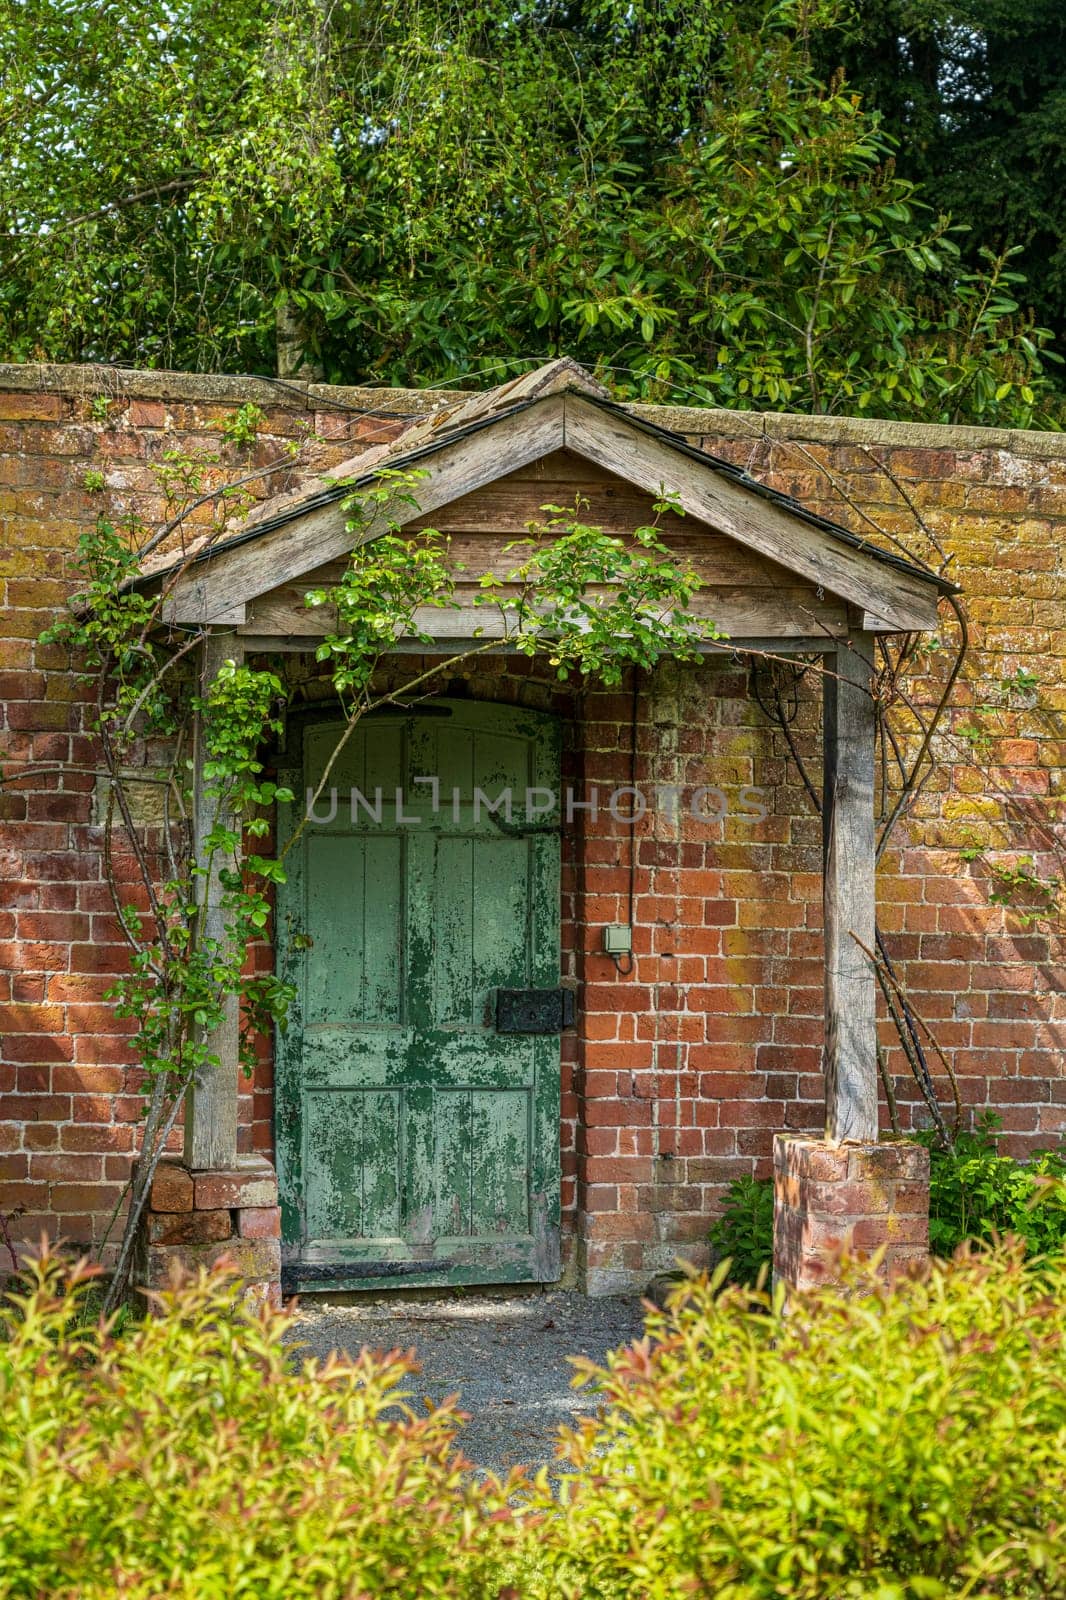 Painted green door and porch in walled garden wall by steheap